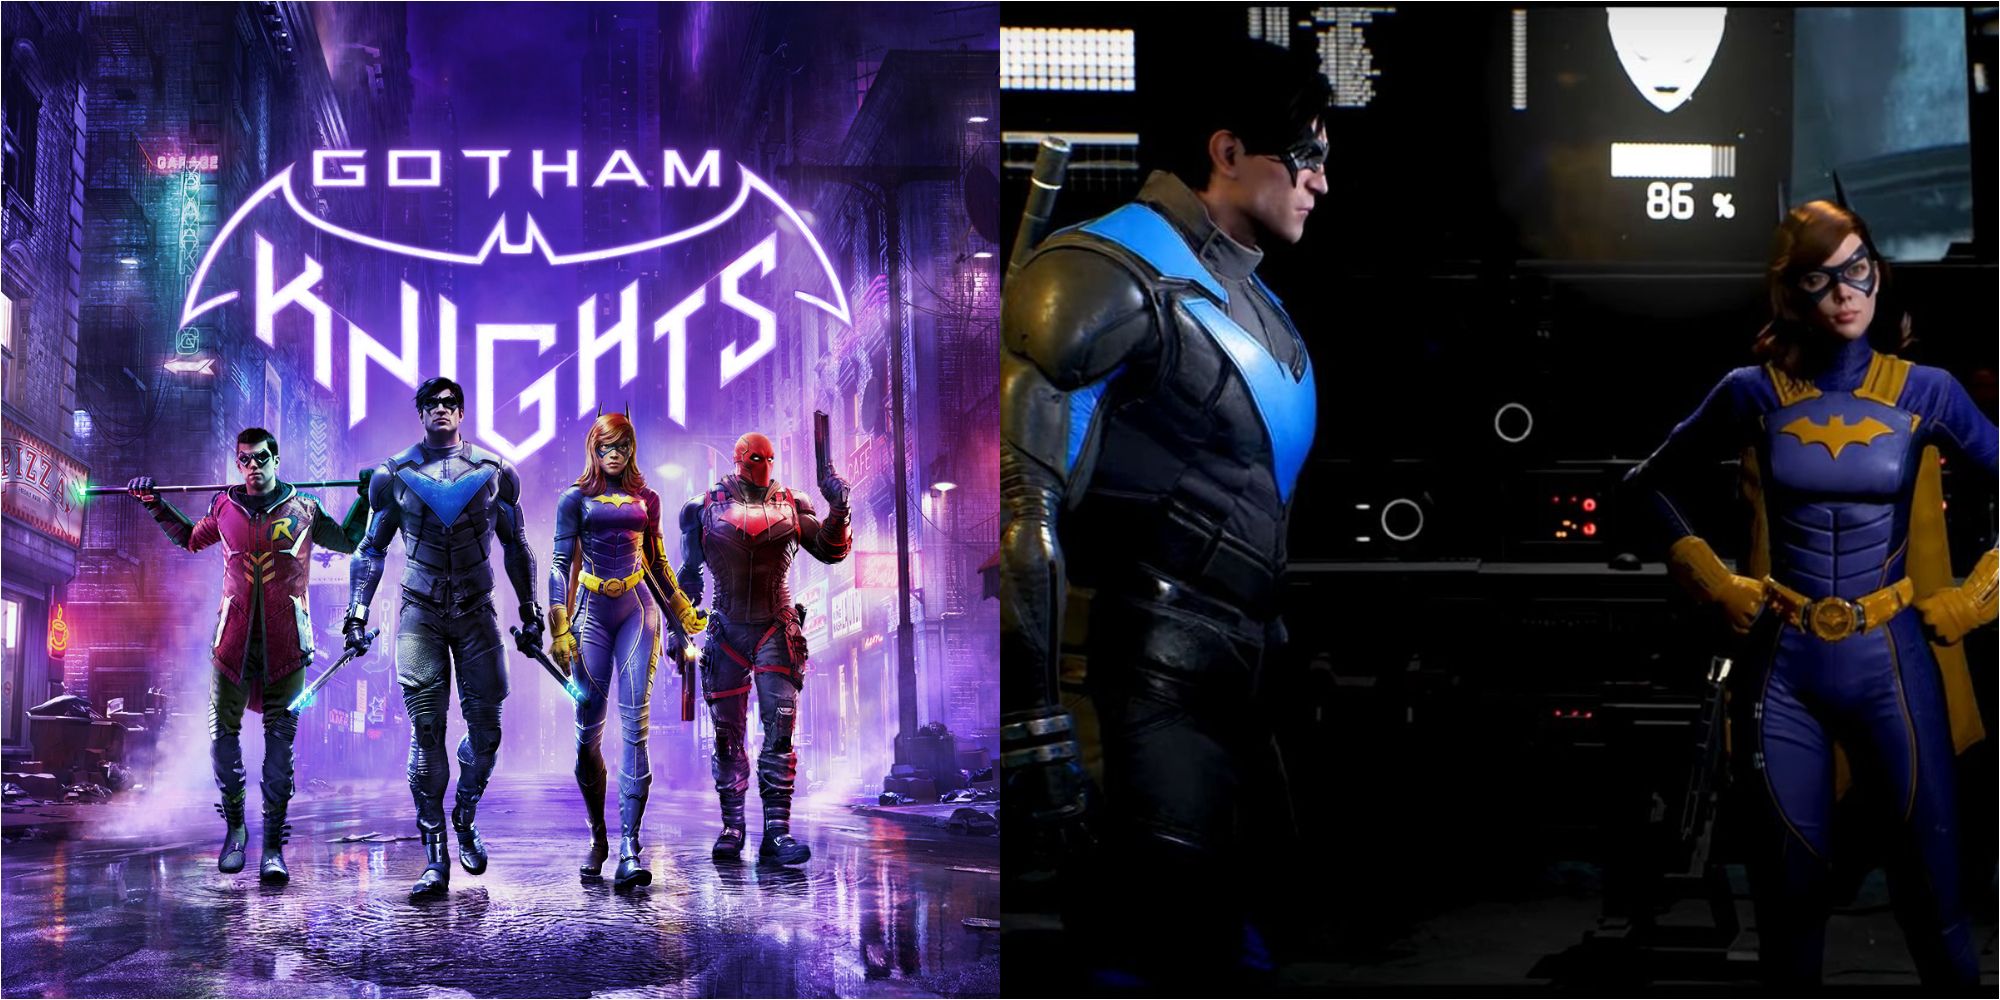 News - Analysis - Review - Gotham Knights, Review Thread